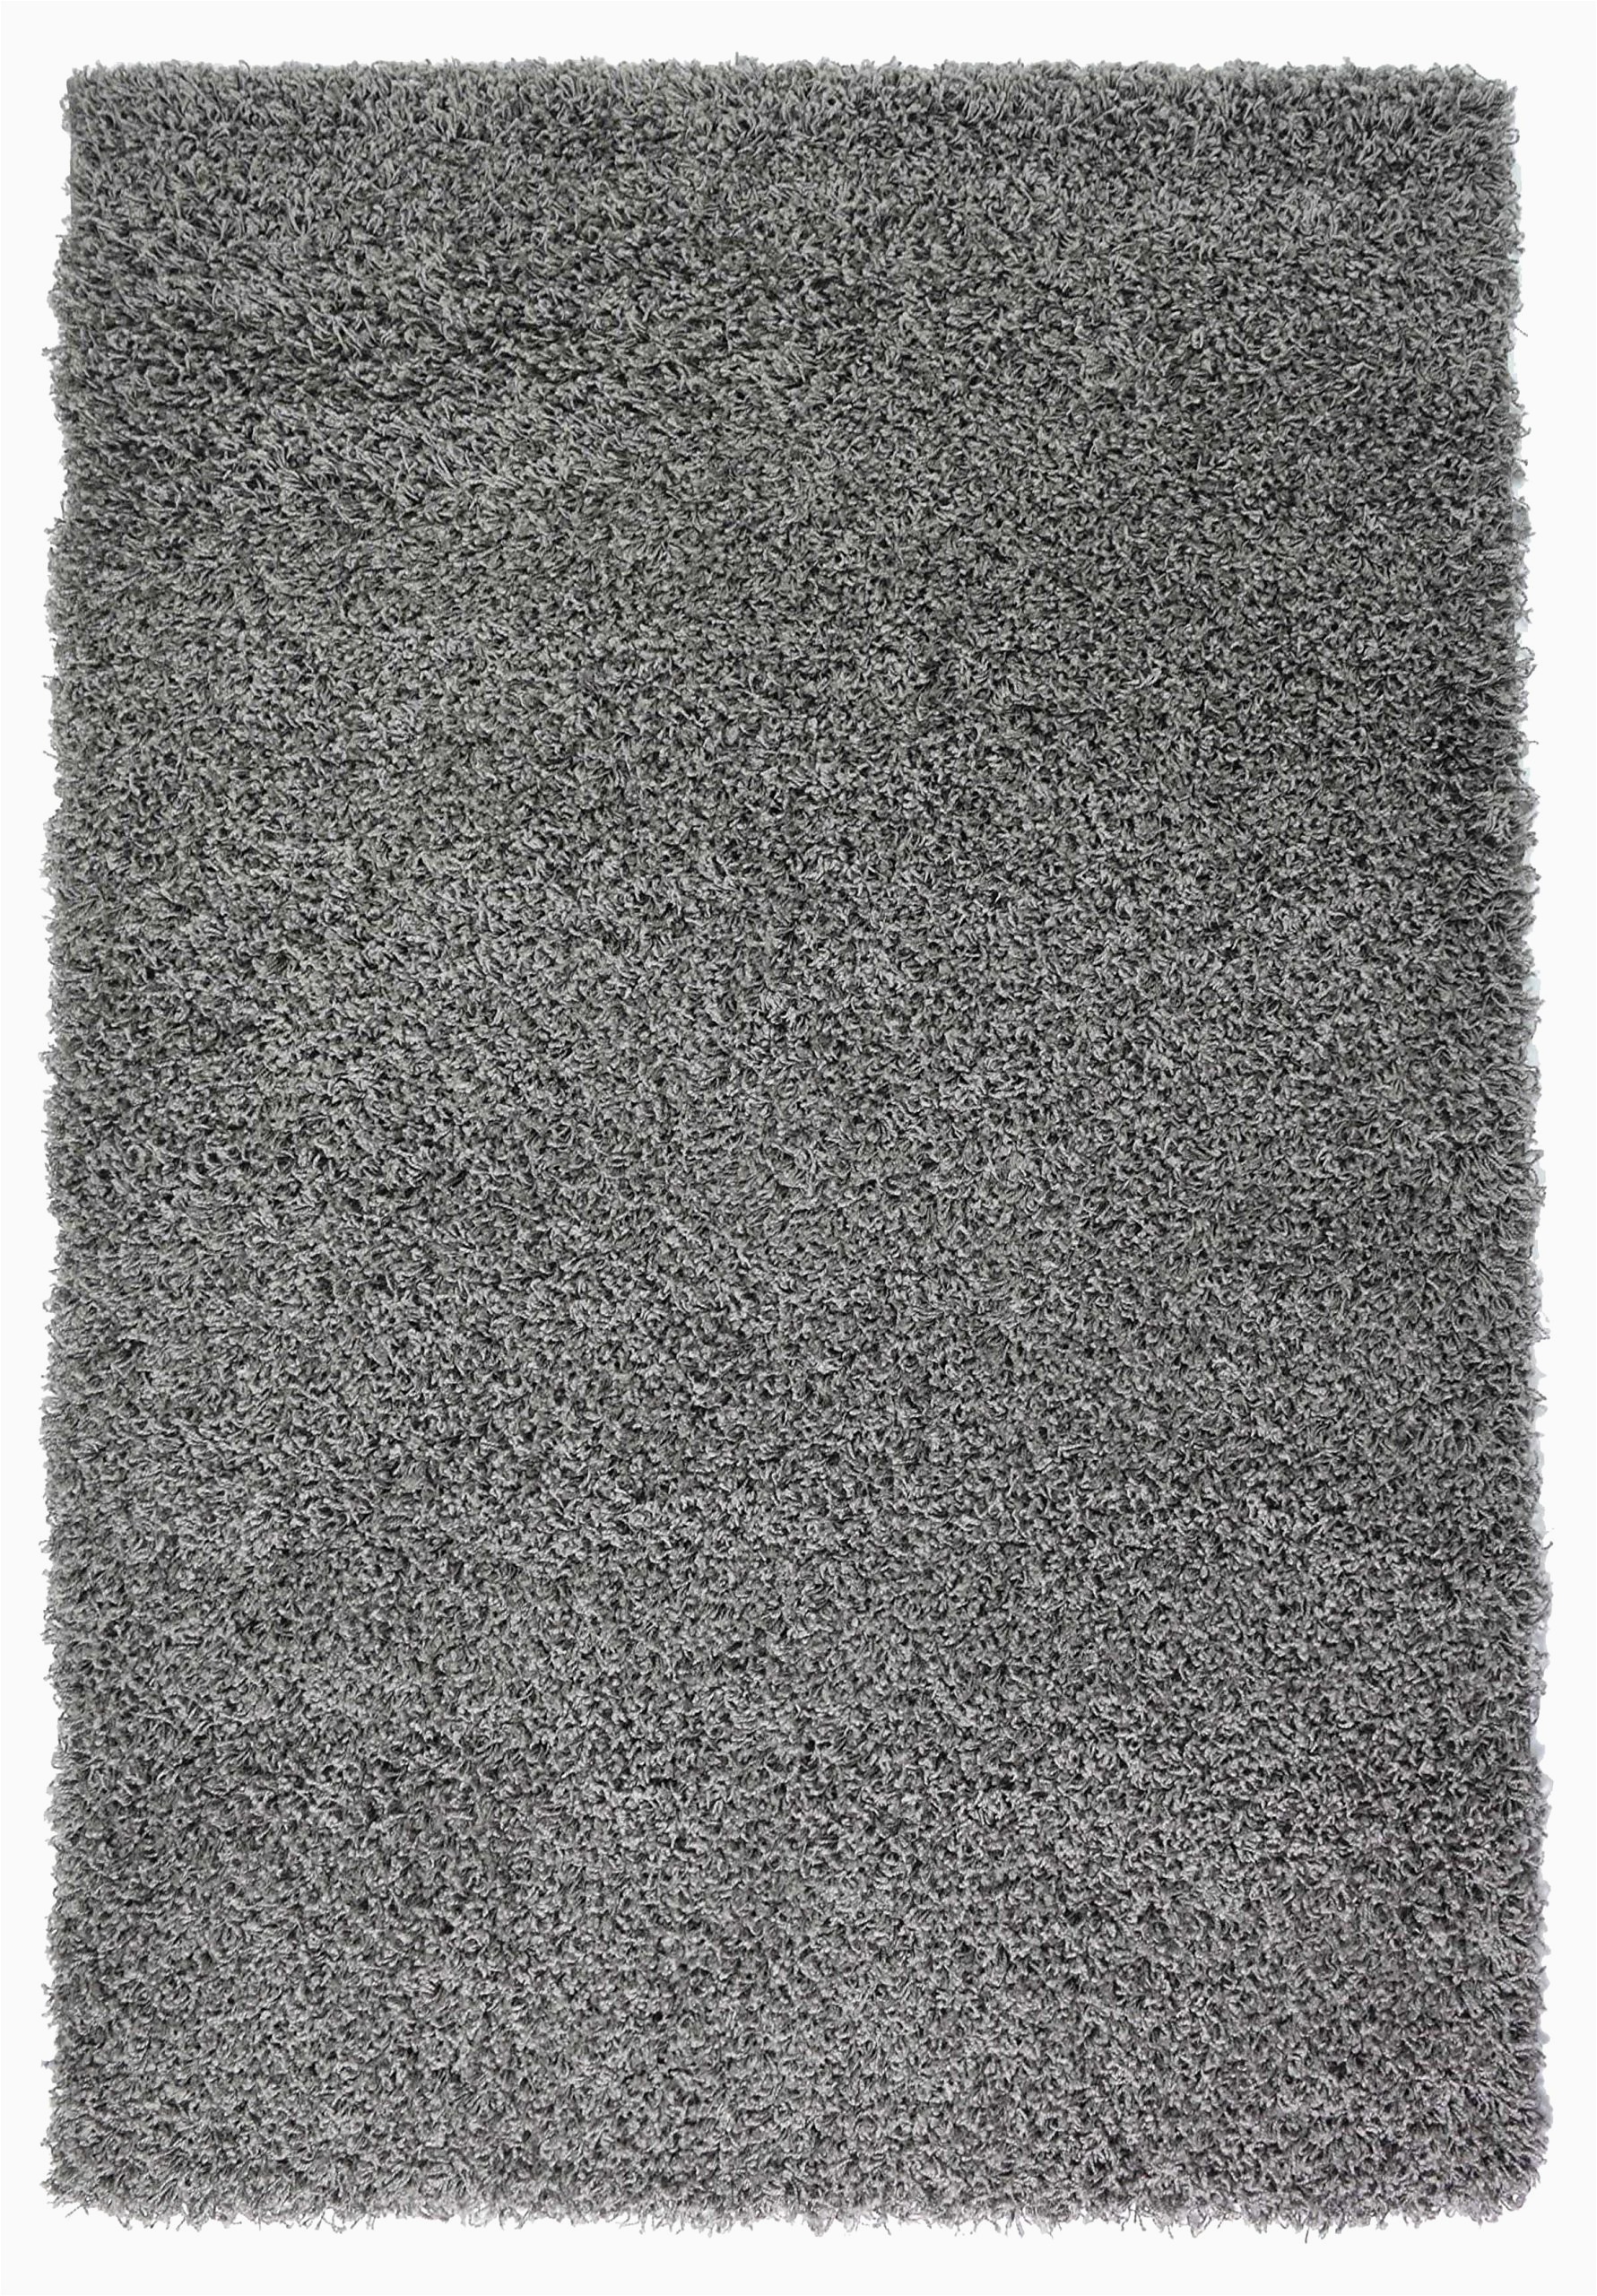 Extra Large area Rugs for Sale Extra Rug 5cm Thick Shag Pile soft Shaggy area Rugs Modern Carpet Living Room Bedroom Mats 160x230cm 5 3"x7 7" Dark Grey